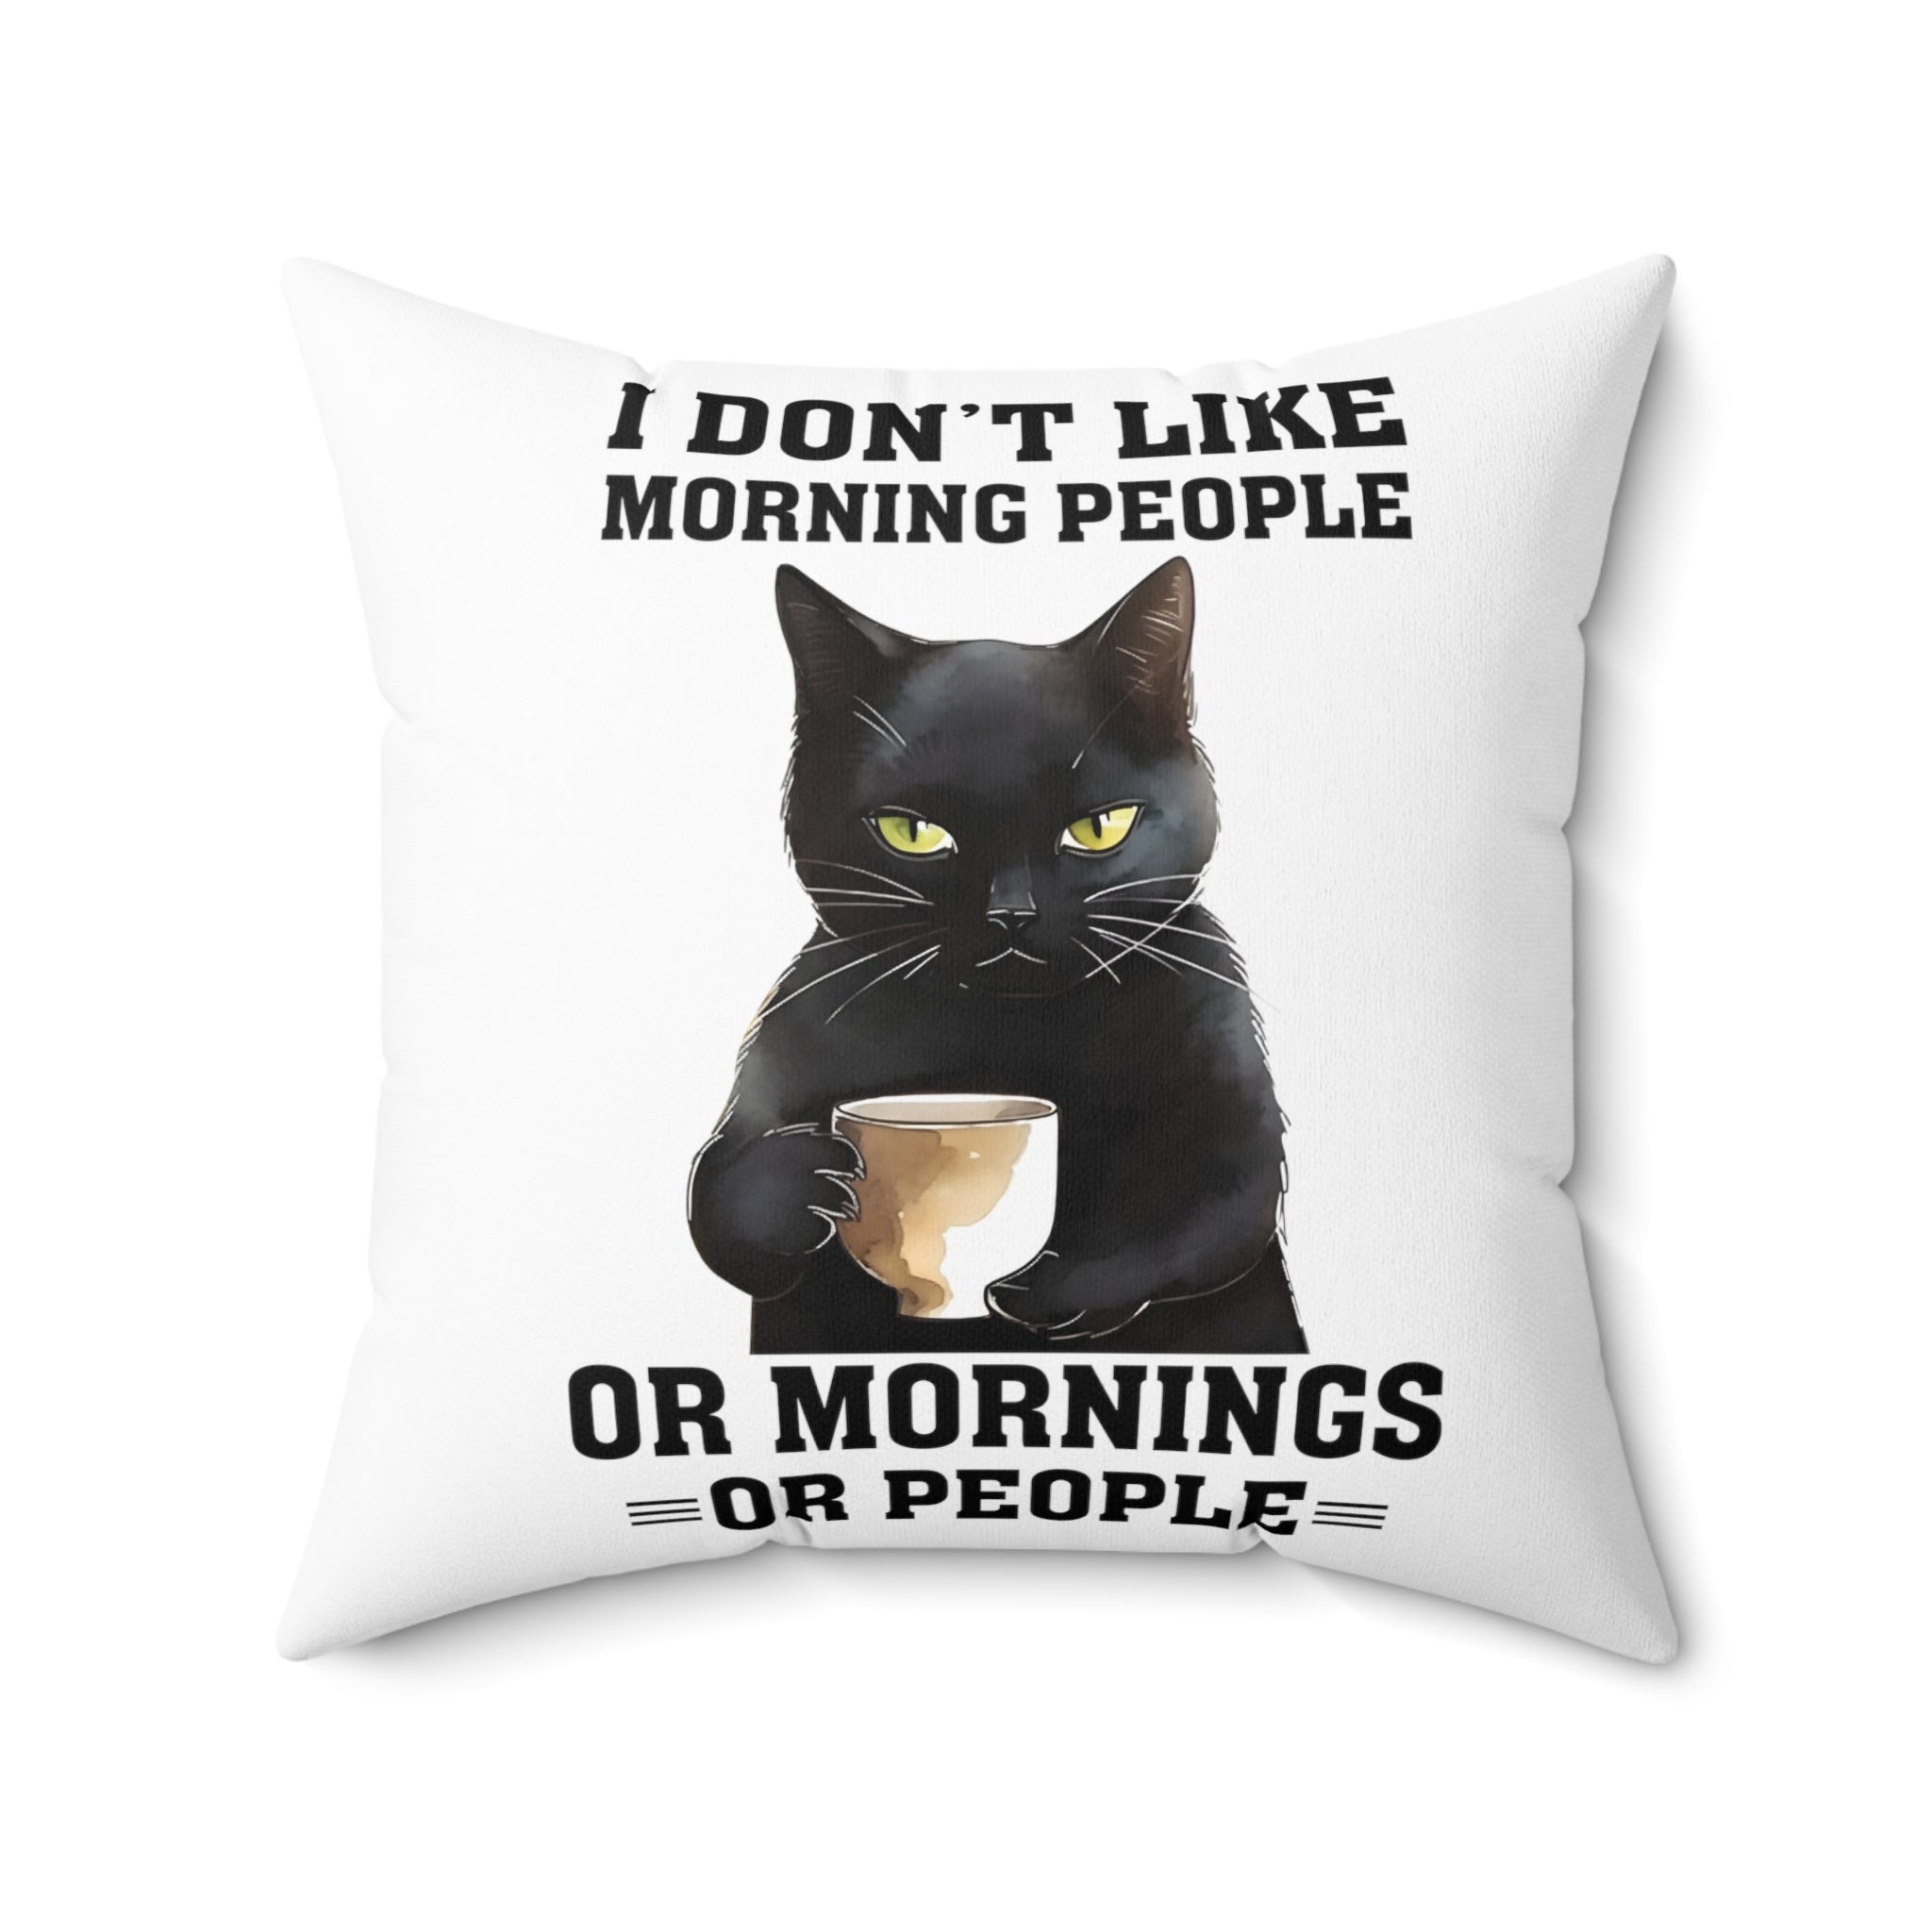 Halloween black cat hates mornings and people Spun Polyester Square Pillow coffee humor funny accent